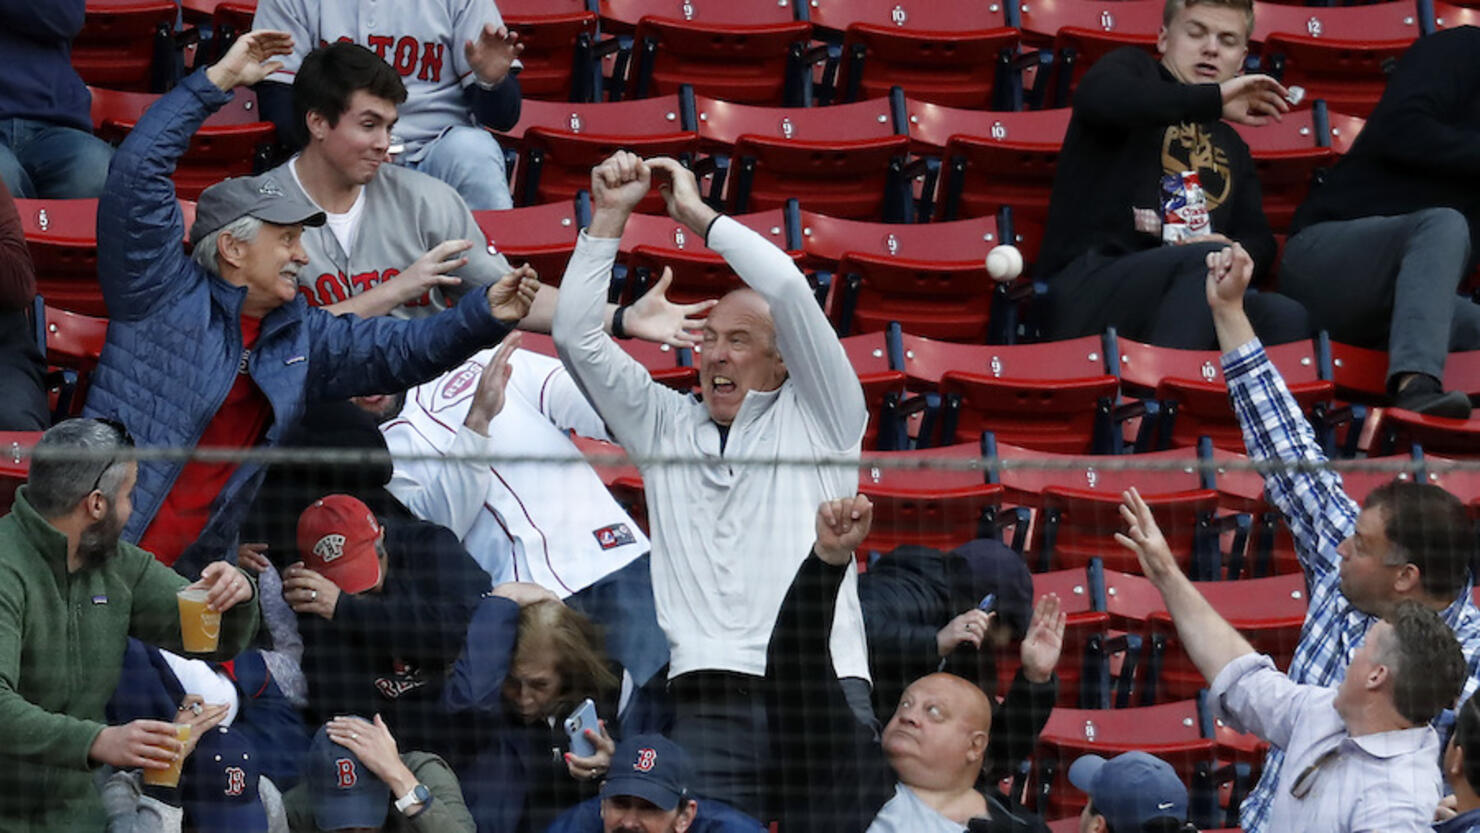 Video Shows Red Sox Fans Fighting Each Other Amid Team's Struggles